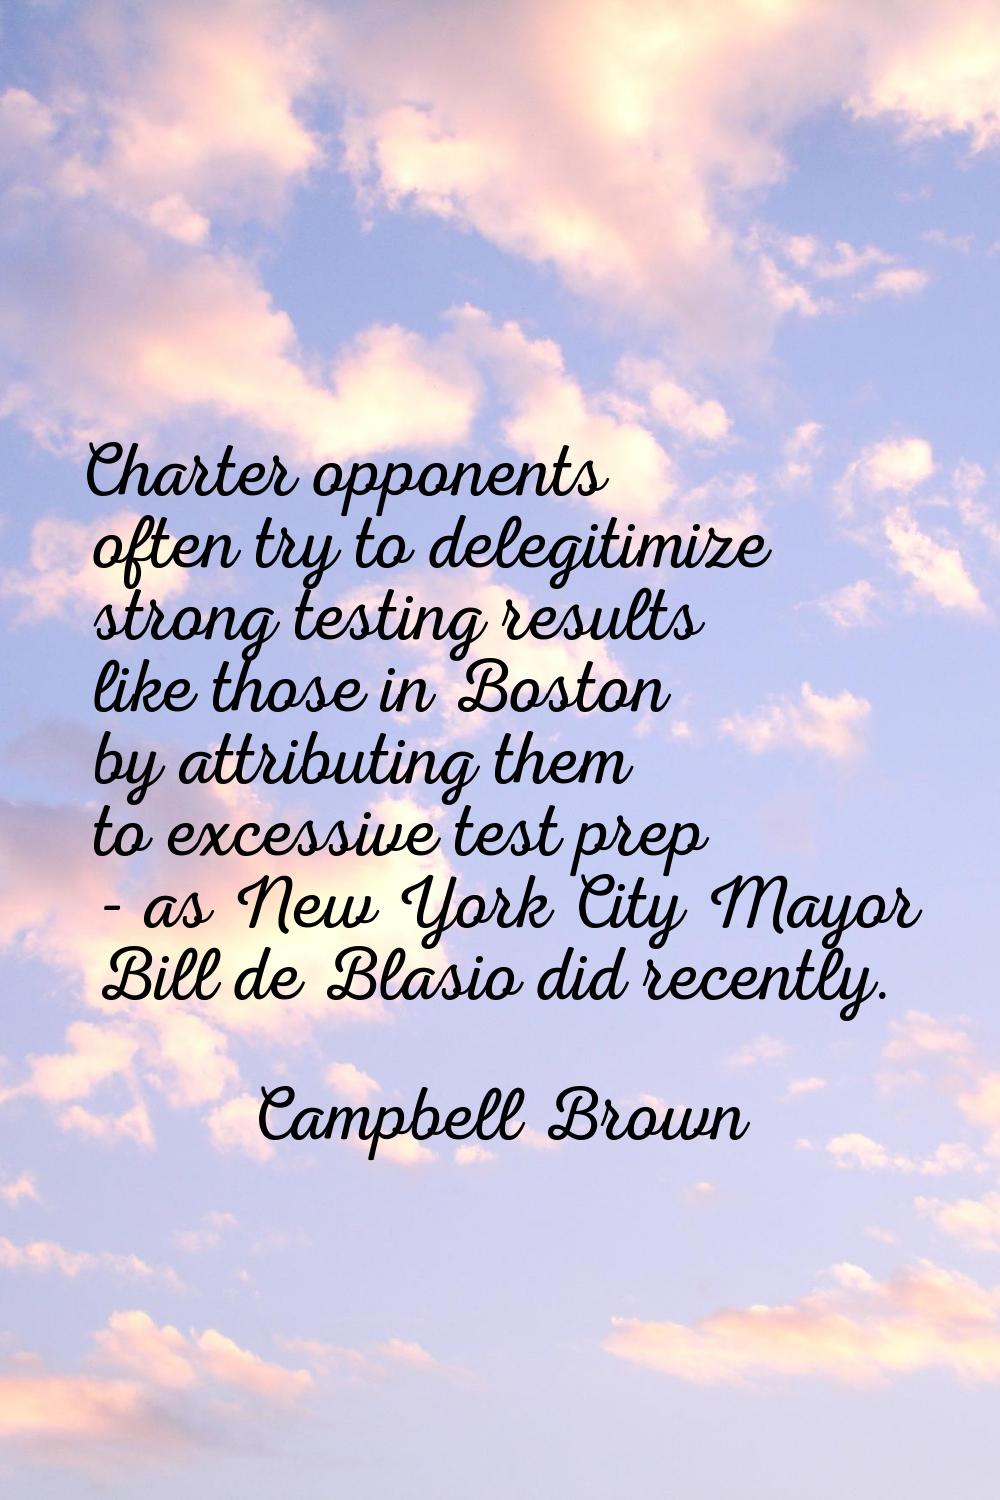 Charter opponents often try to delegitimize strong testing results like those in Boston by attribut